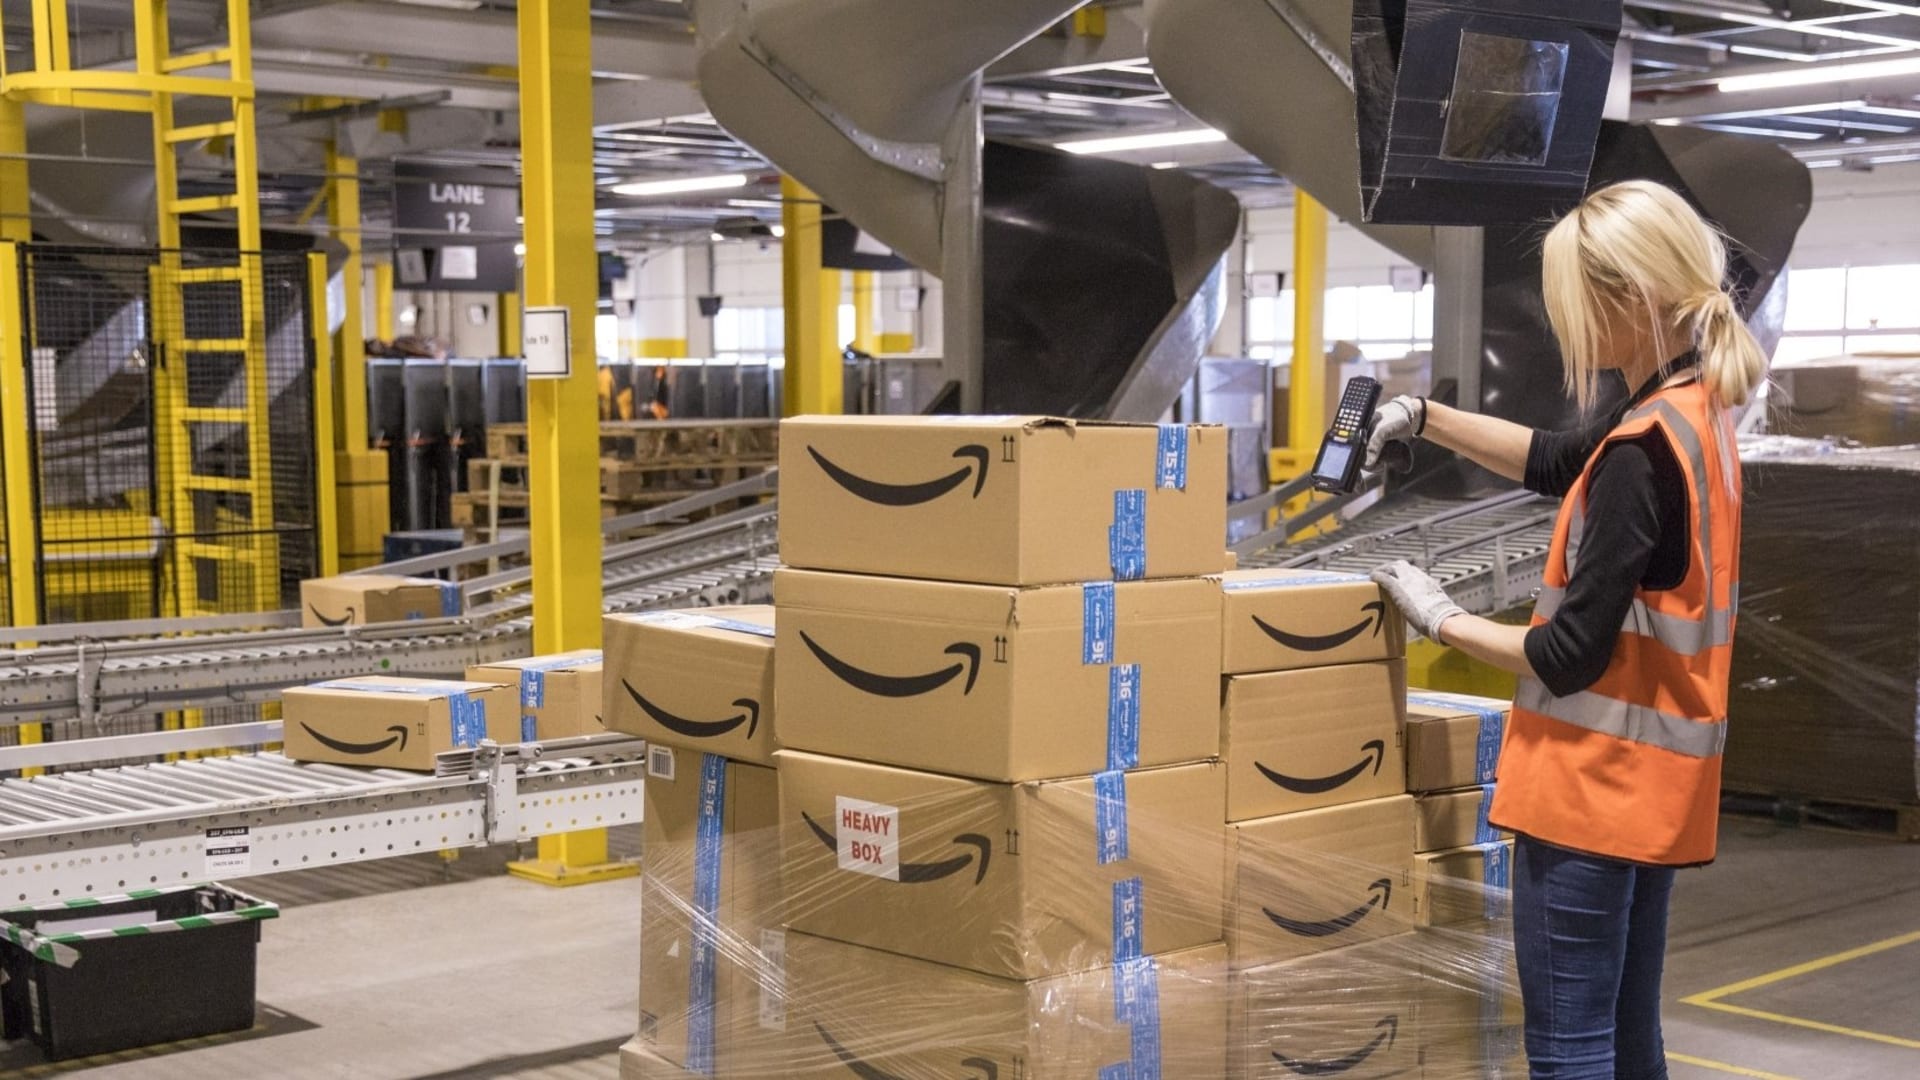 The 9 Simple Words That Made Amazon a Trillion-Dollar Company